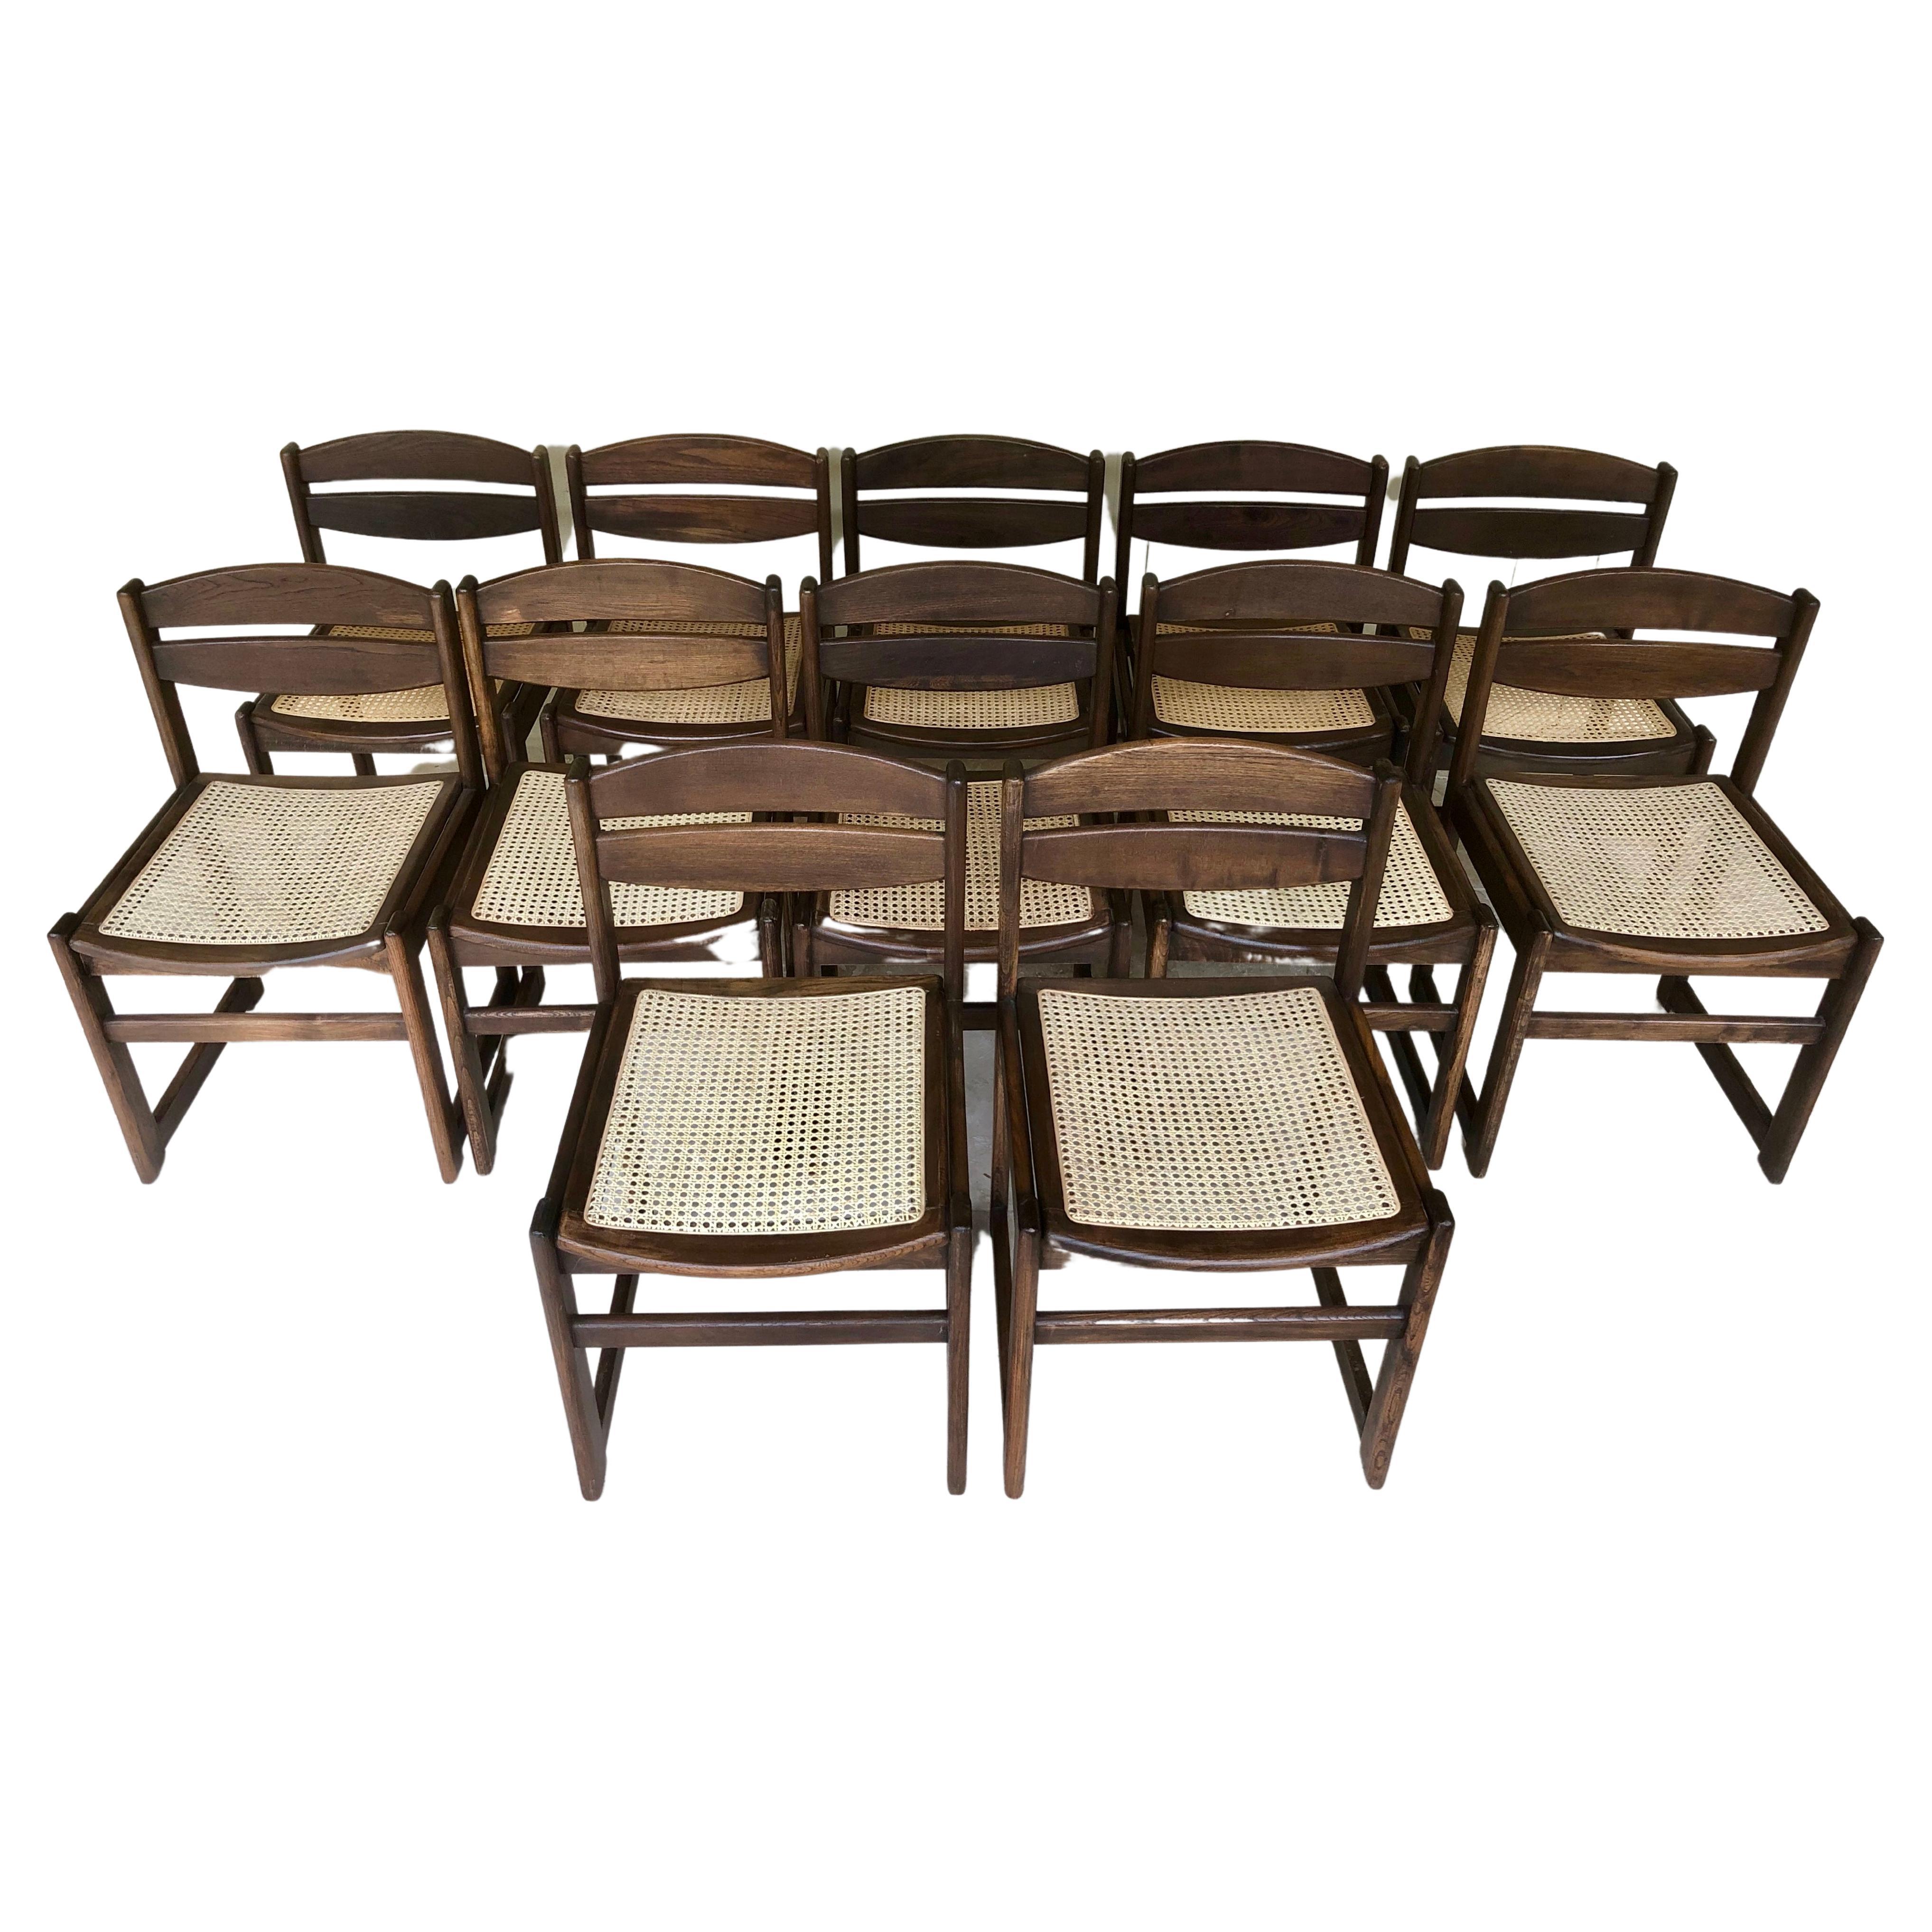 Set of 12 Mid-century Sled Style Dining Chairs in Walnut & Cane